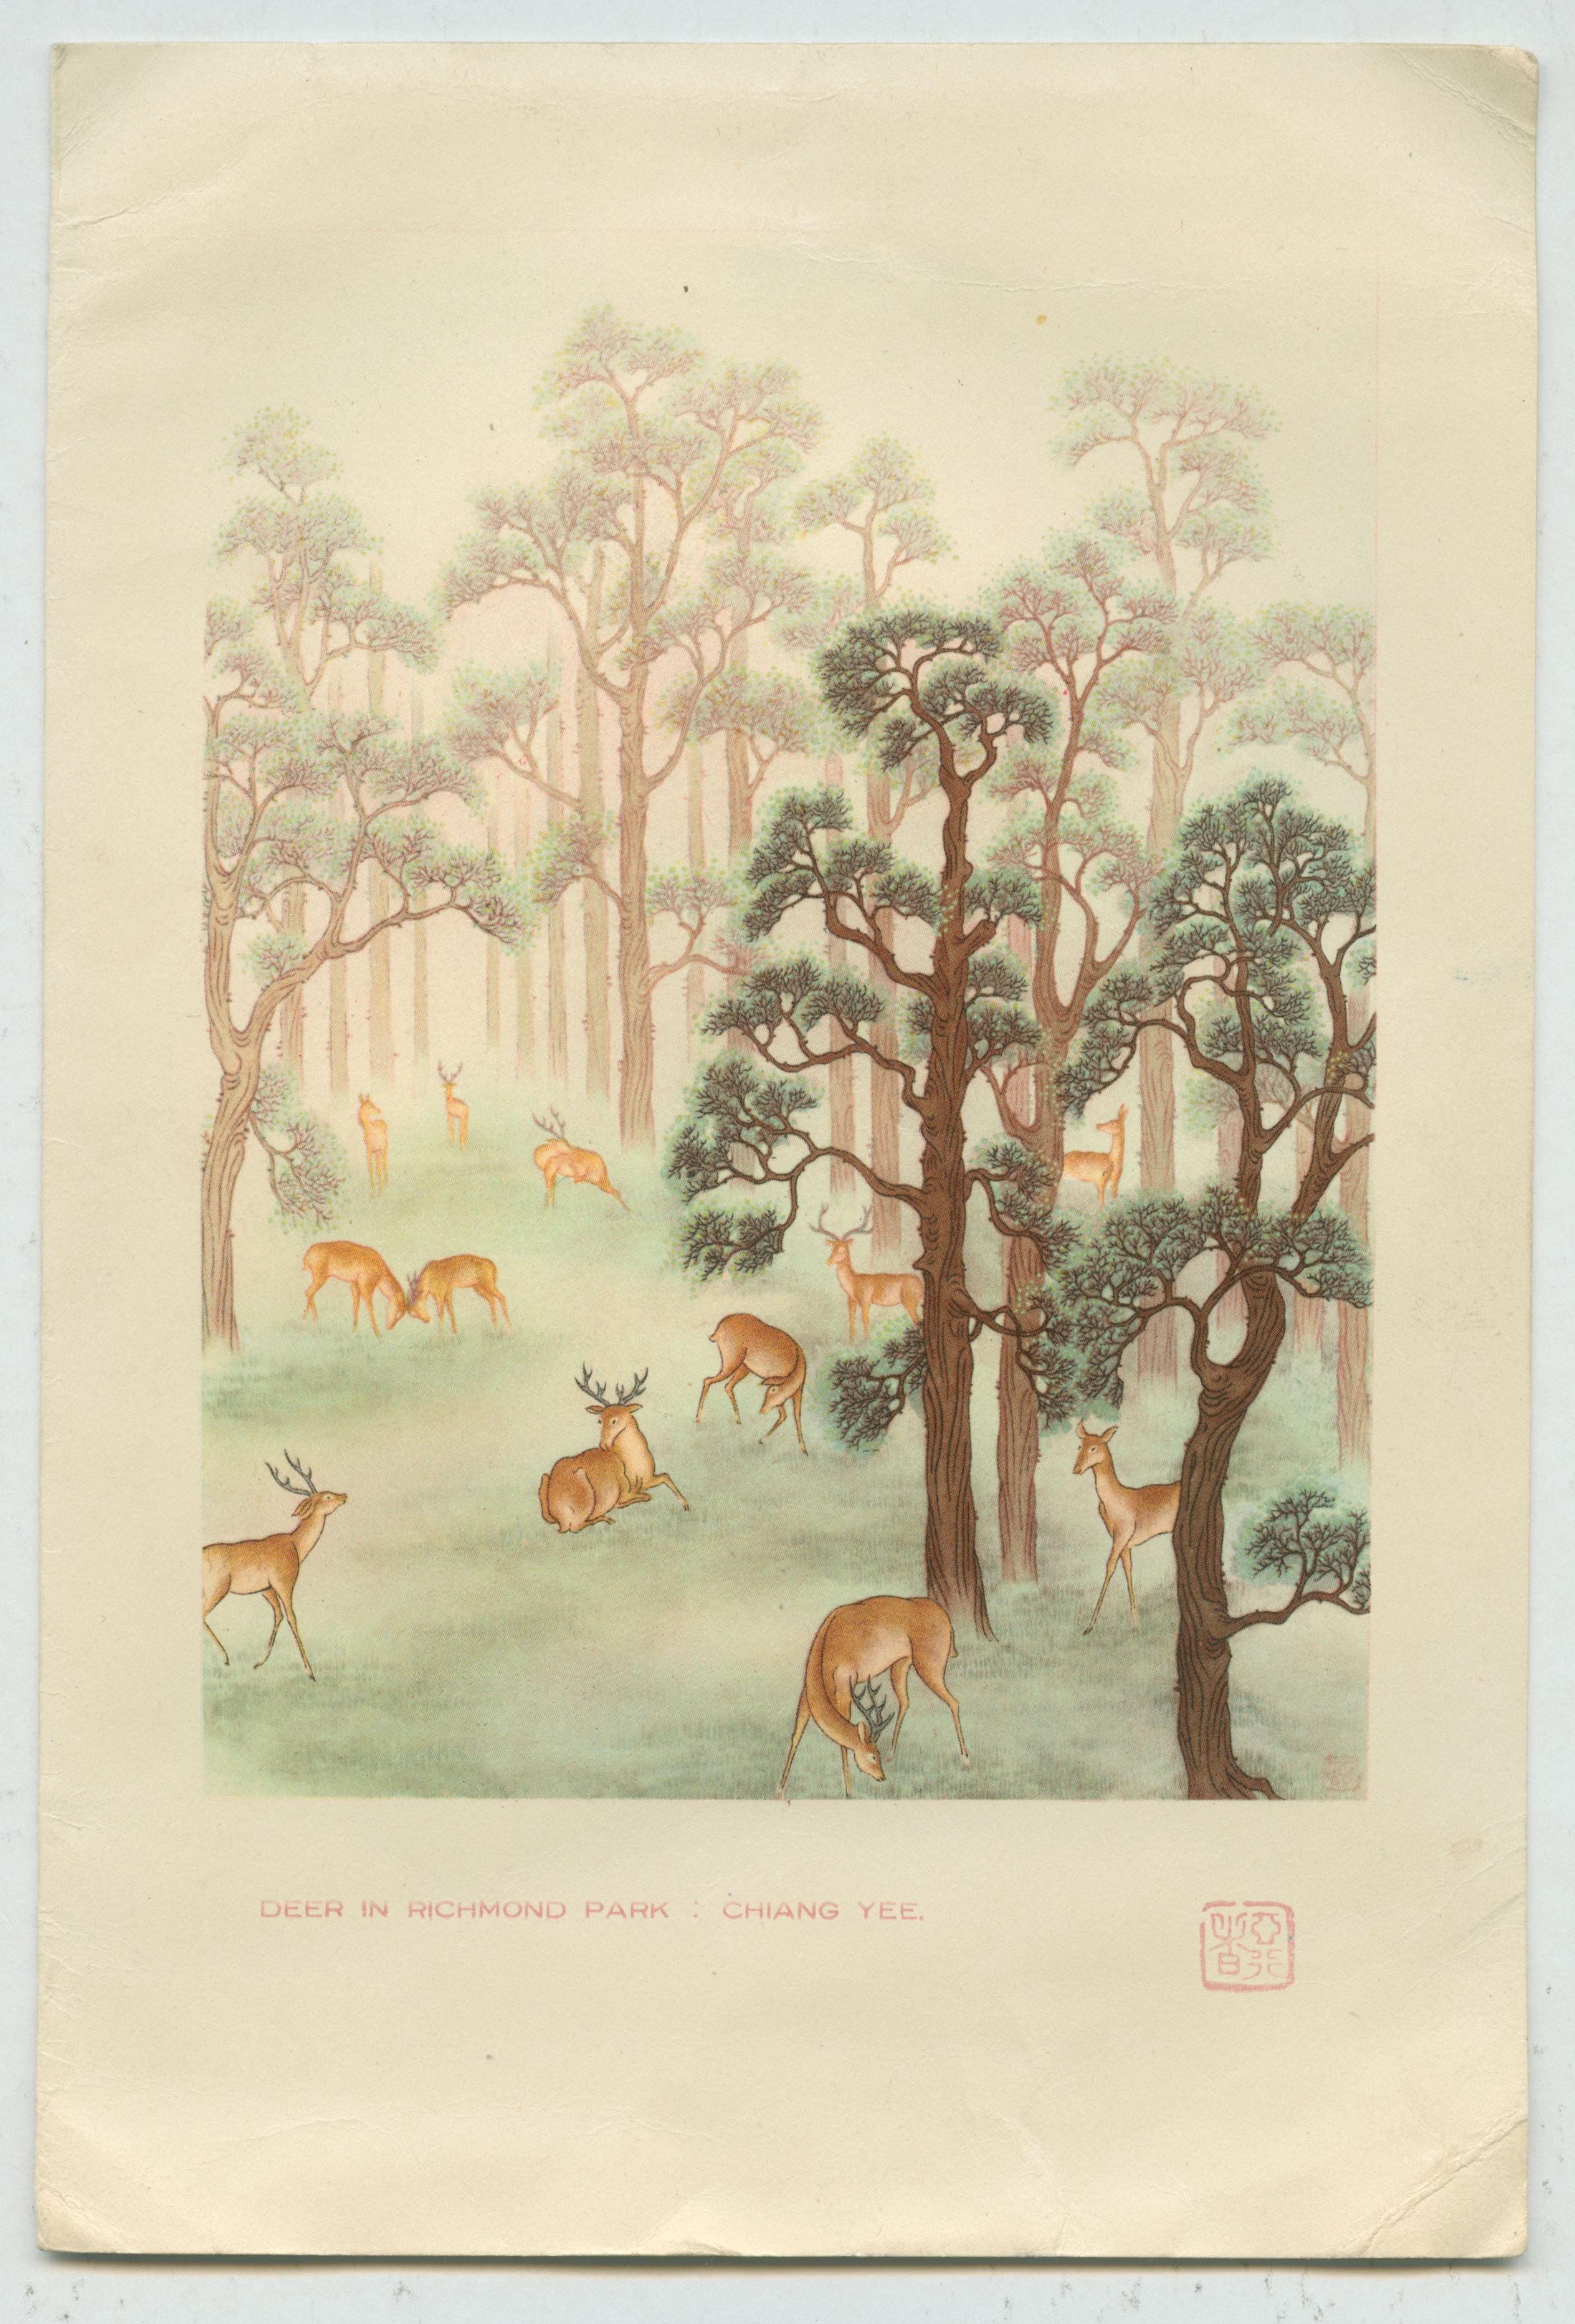 A Chinese view of the deer in Richmond Park